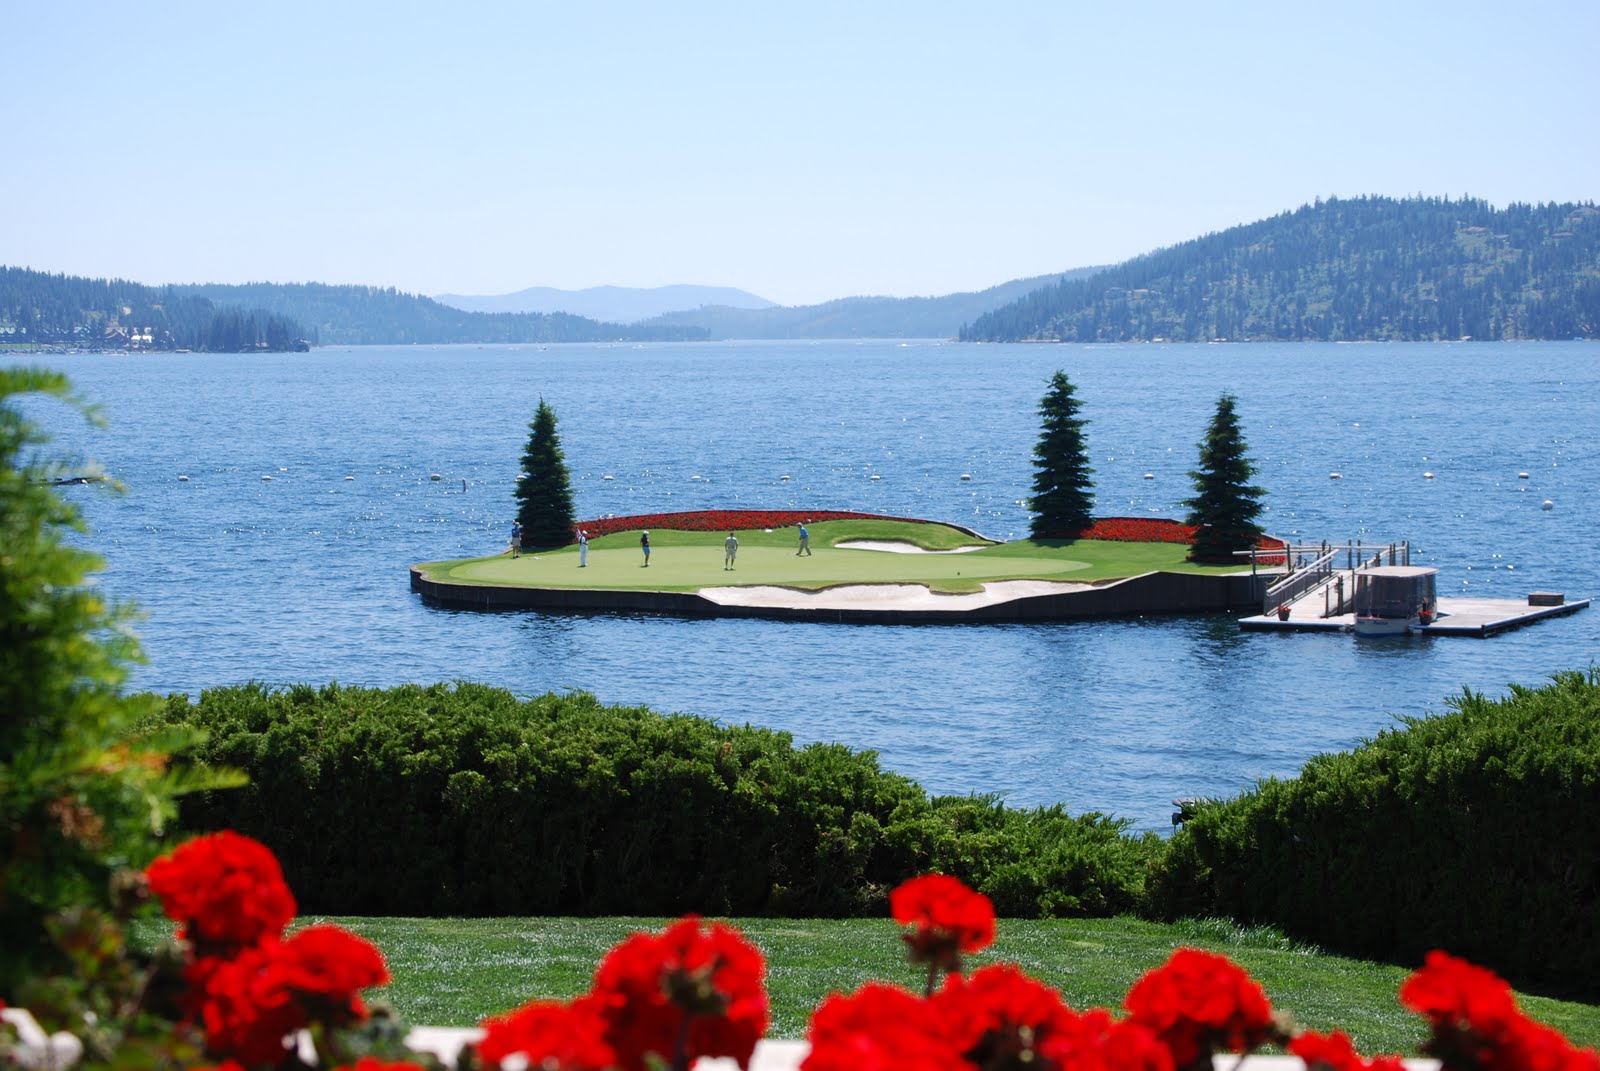  Floating Golf Course at Coeur d’Alene Resort by Duane Hagadone in Idaho 